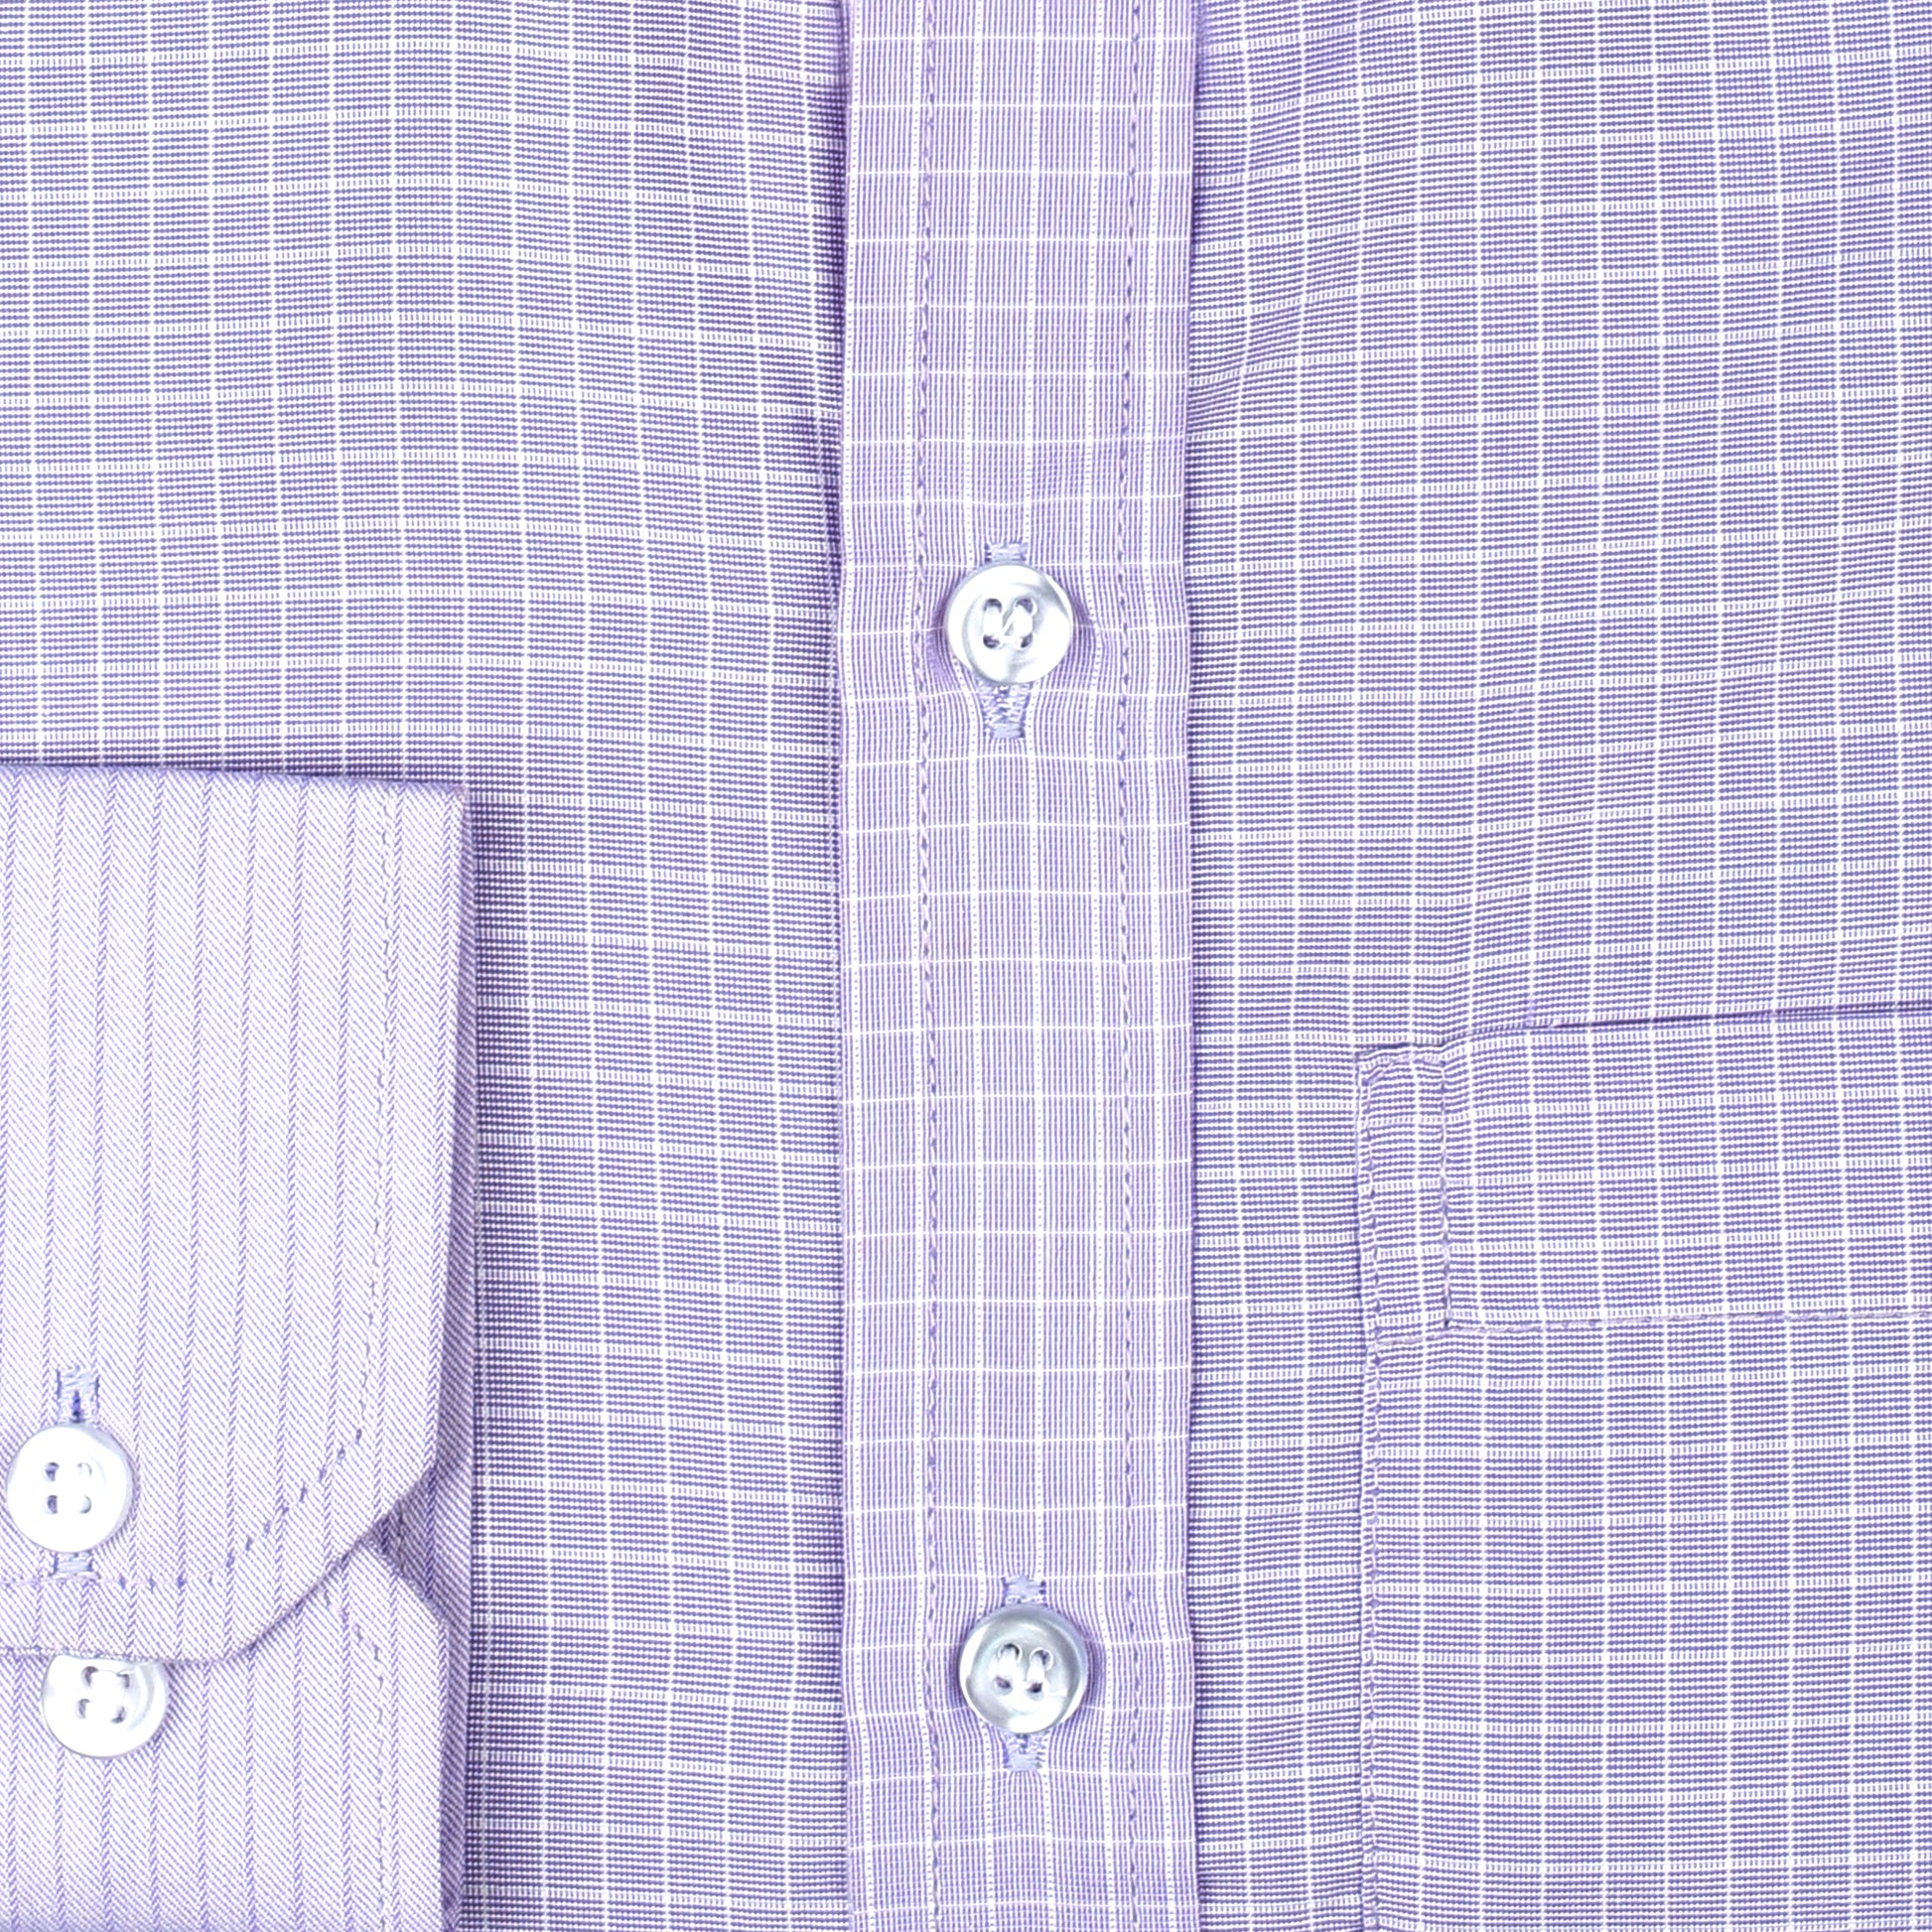 Refined Lavender Checkered Shirt